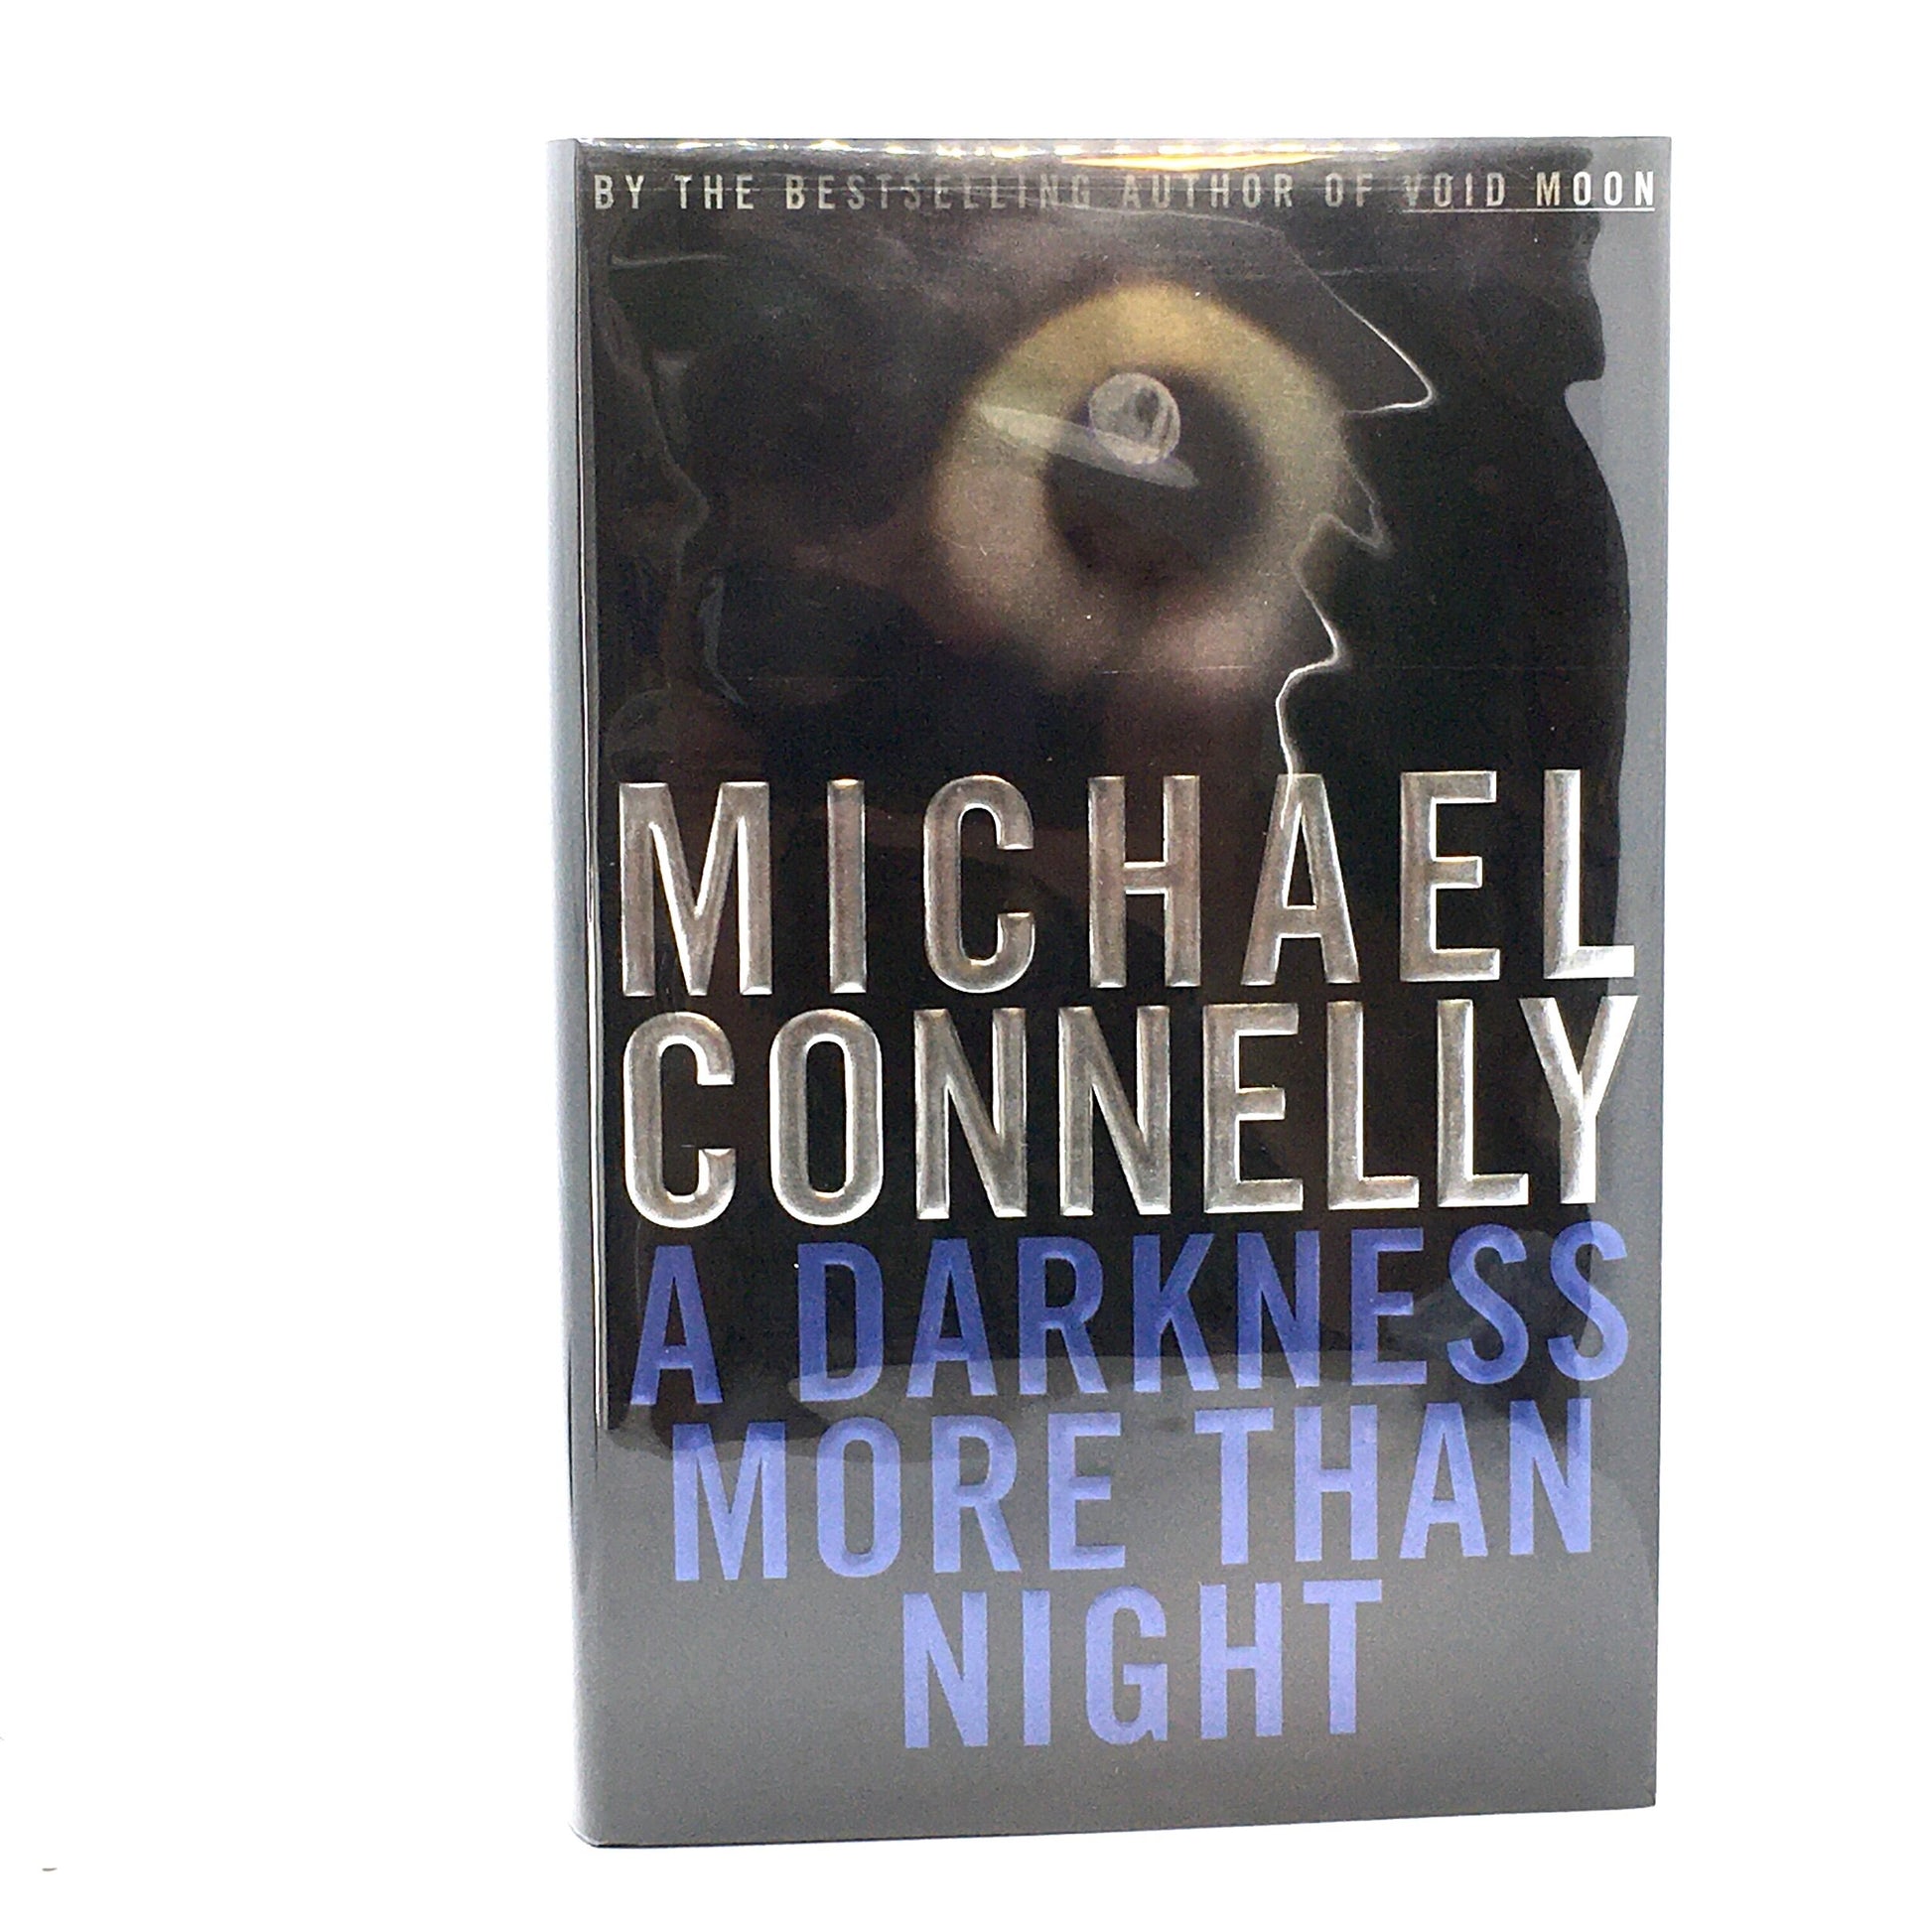 CONNELLY, Michael "A Darkness More Than Night" [Little, Brown & Co, 2001] 1st Edition (Signed) - Buzz Bookstore